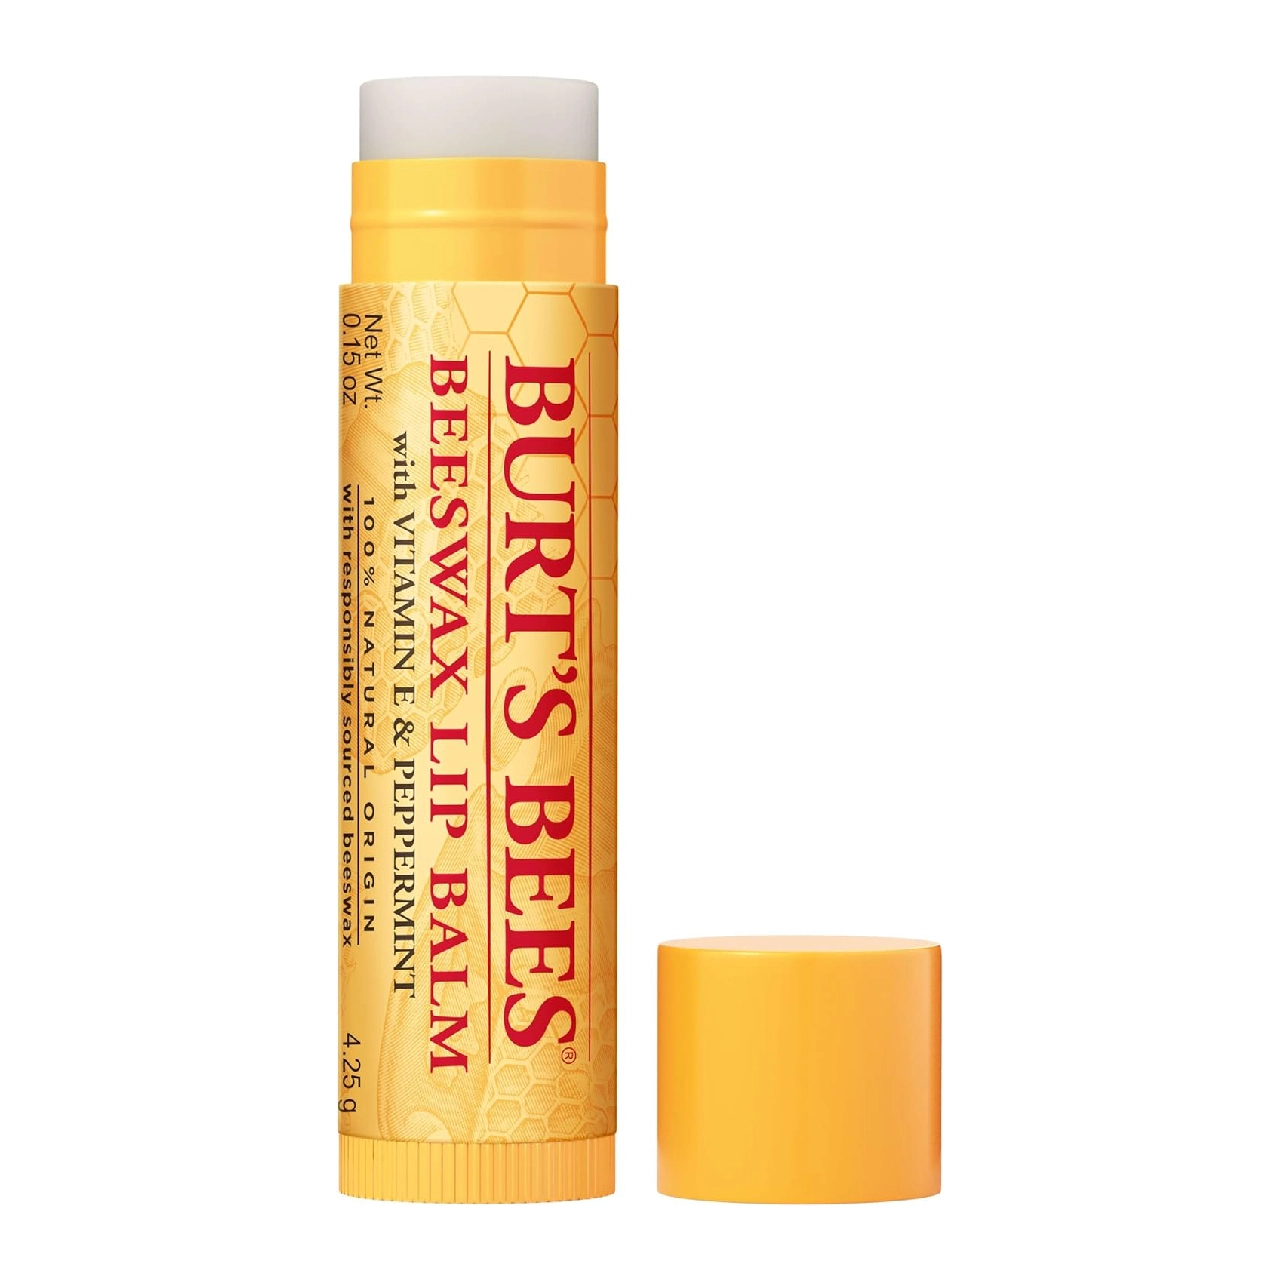 Burt's Bees Beeswax Lip Balm tube on a white background